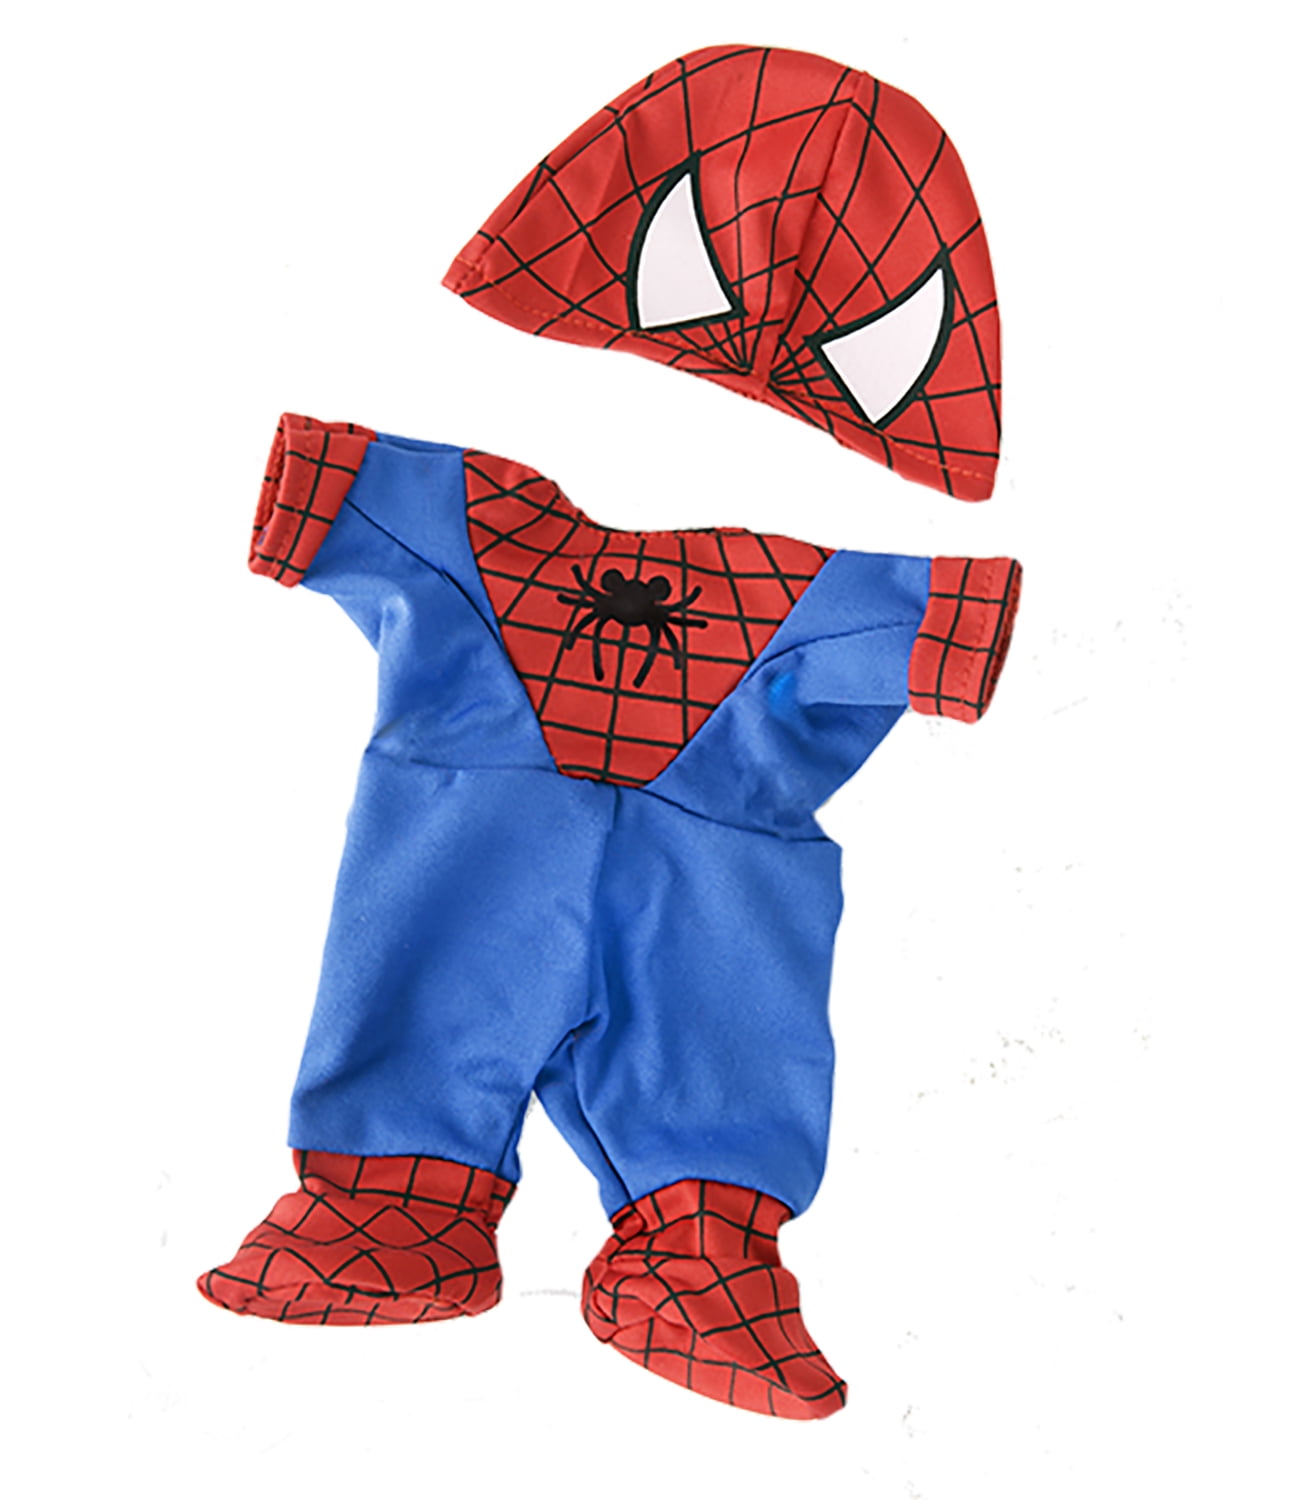 Spiderman Costume & Ours Brun 16"/40cm Build Your Own Teddy Bear Making Kit 